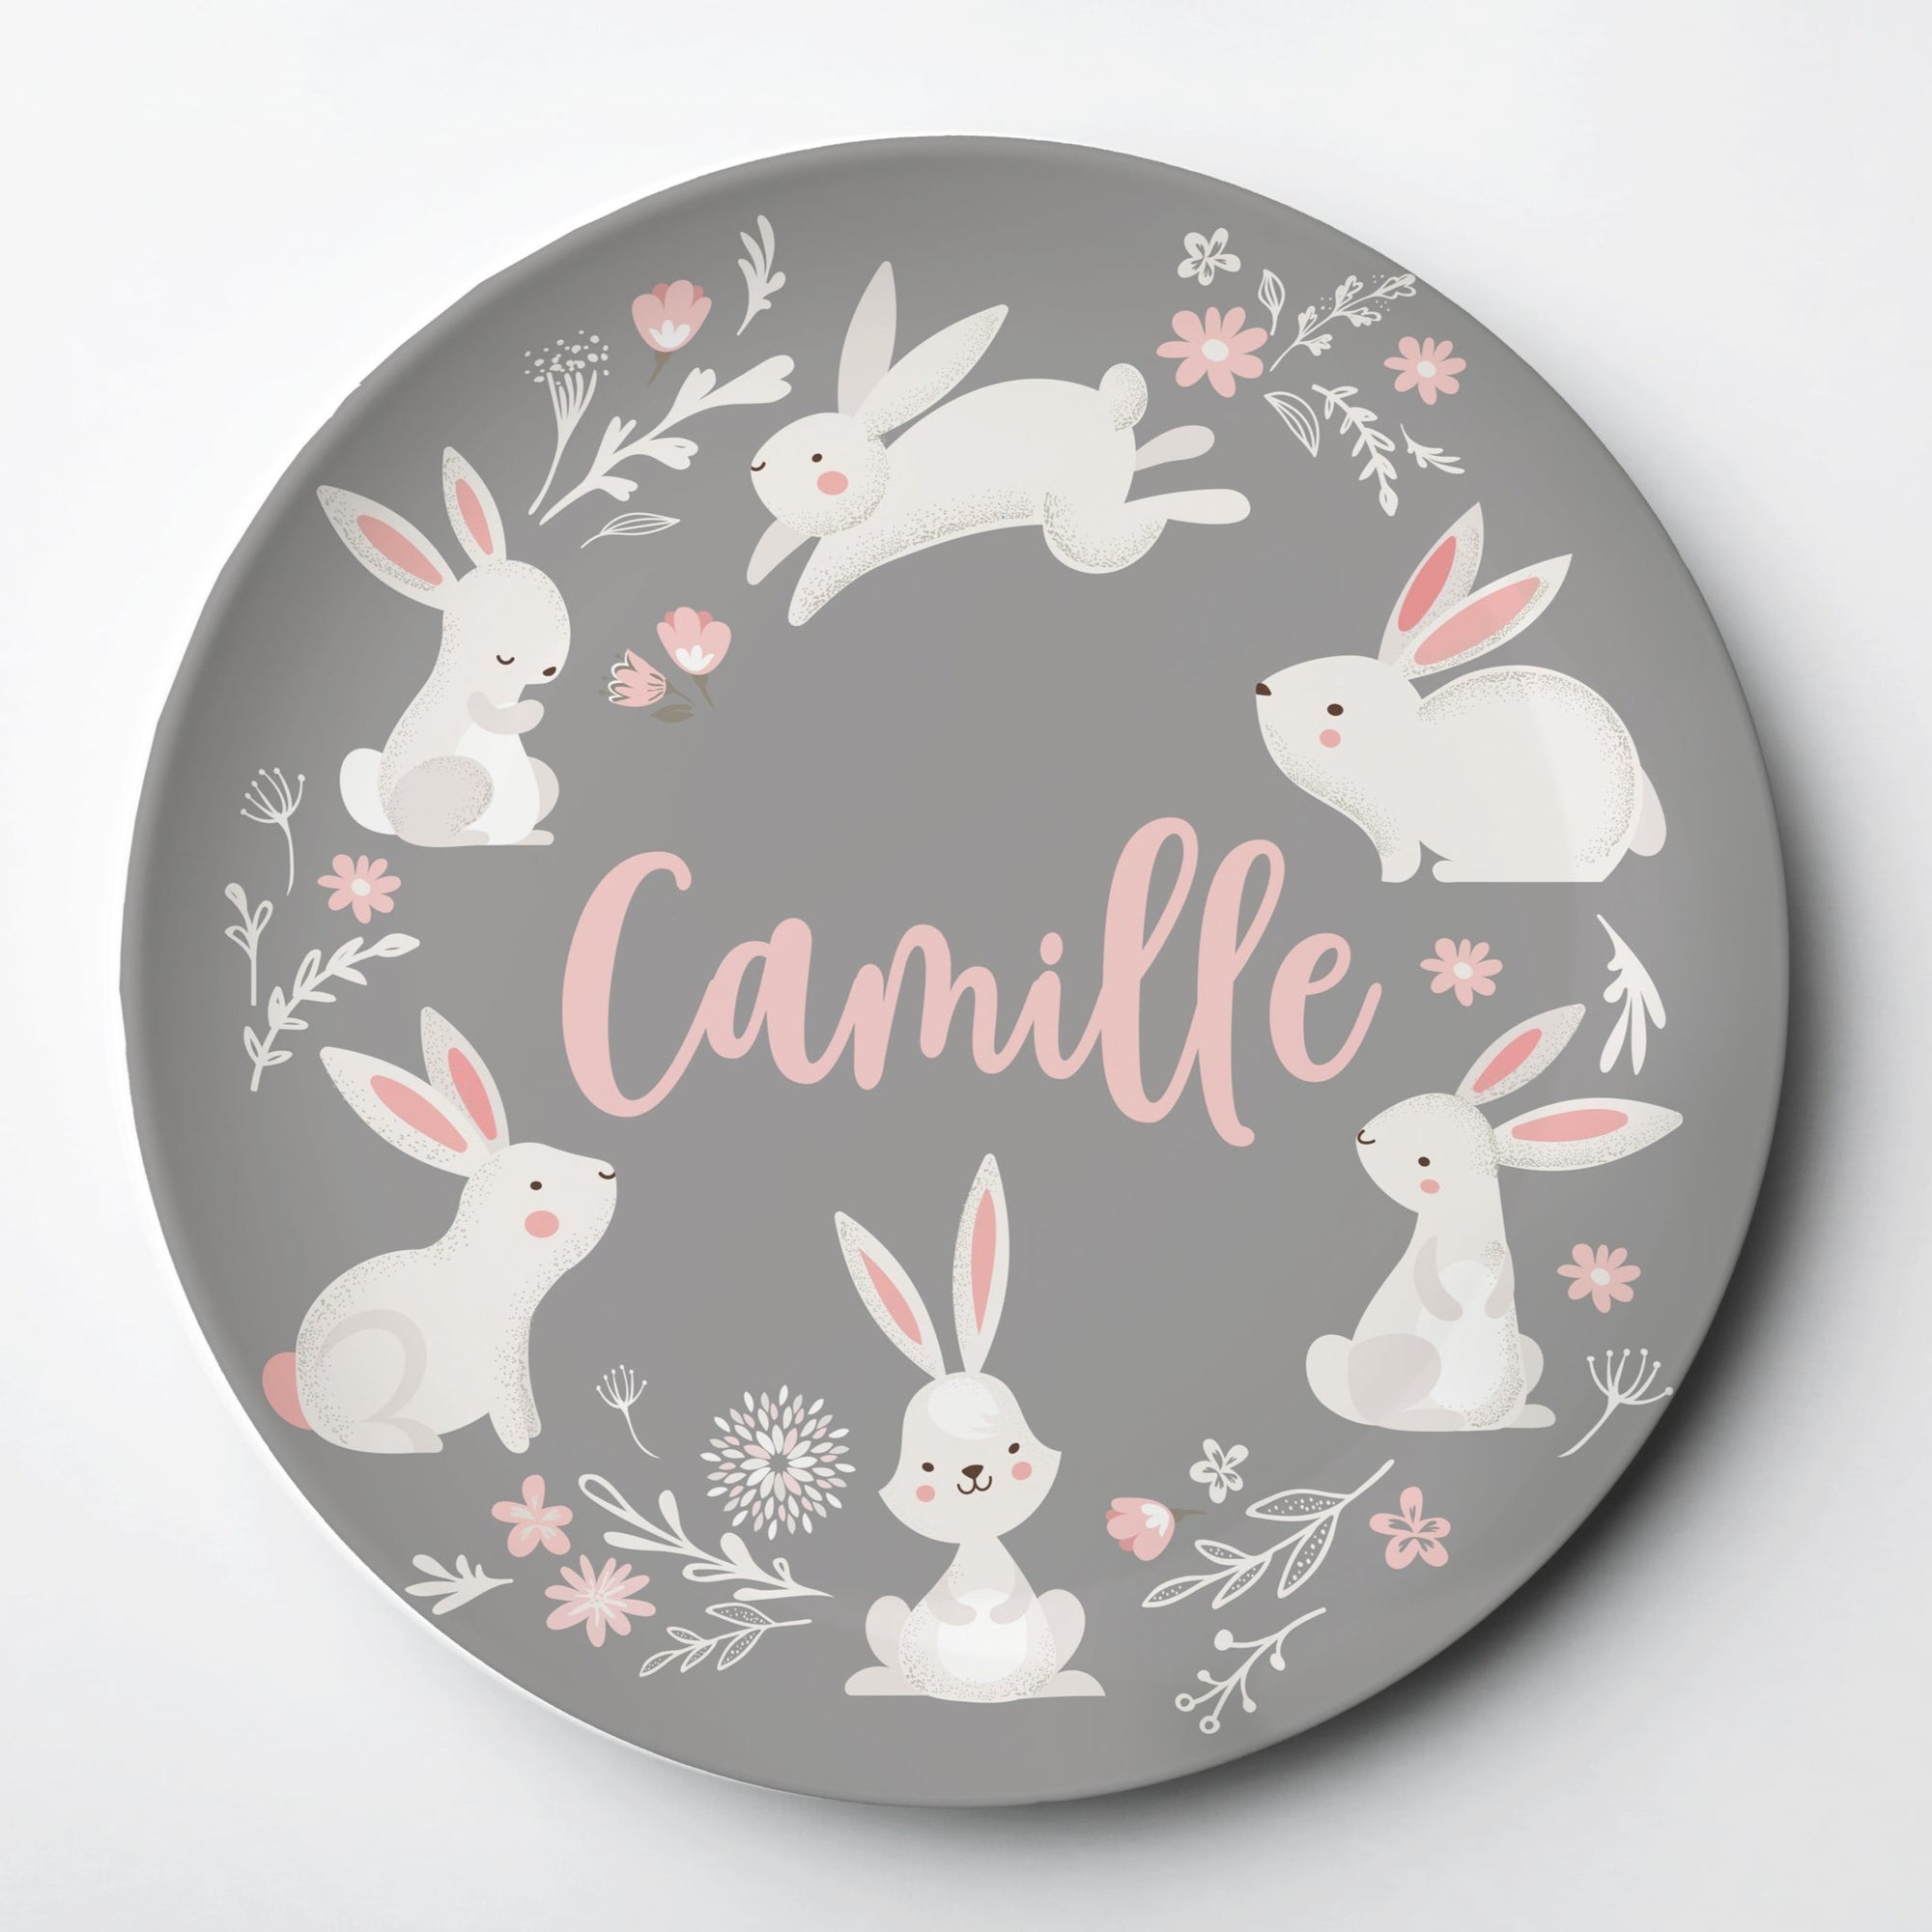 Easter Personalized Plate in soft gray with a wreath of bunnies and flowers